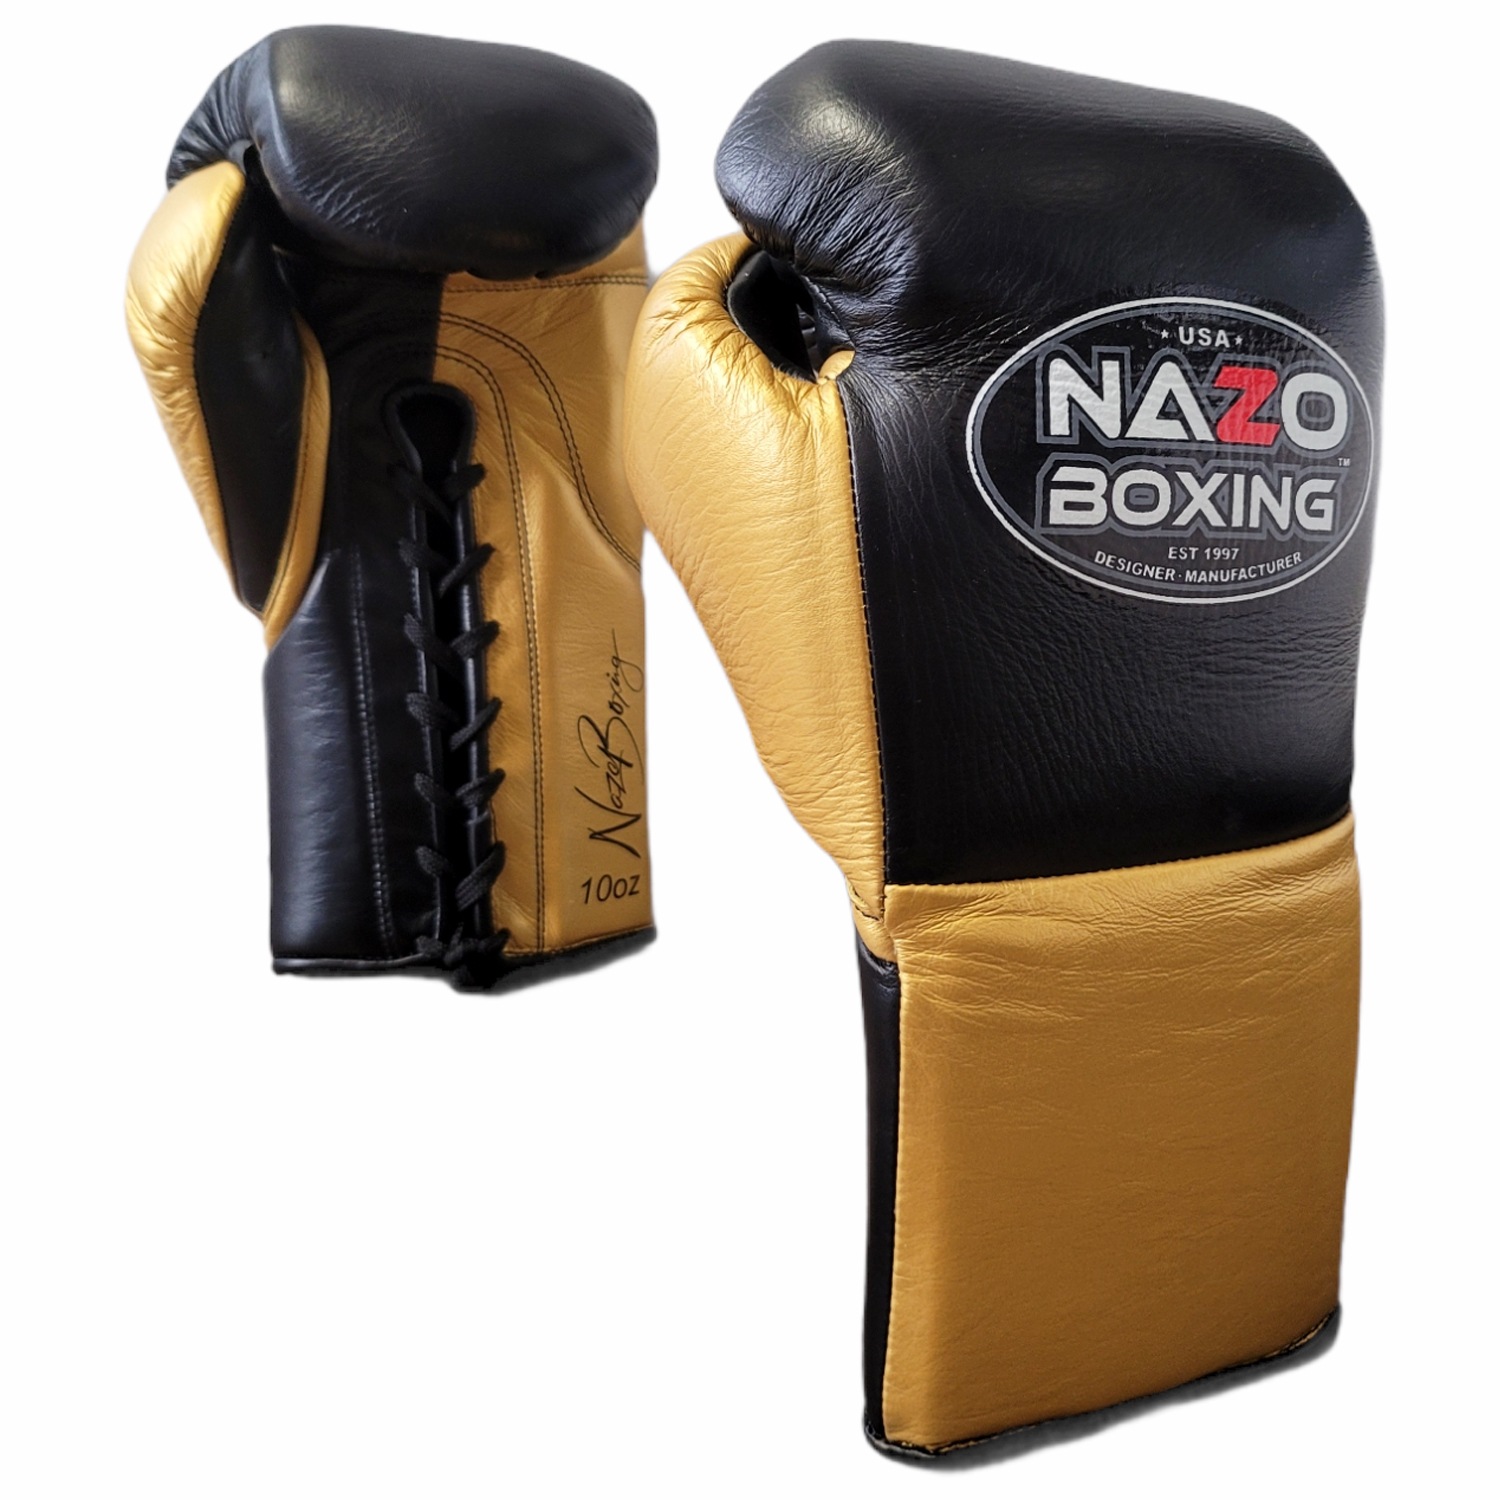 Boxing Supplies Store Online | Best Boxing Products for Sale